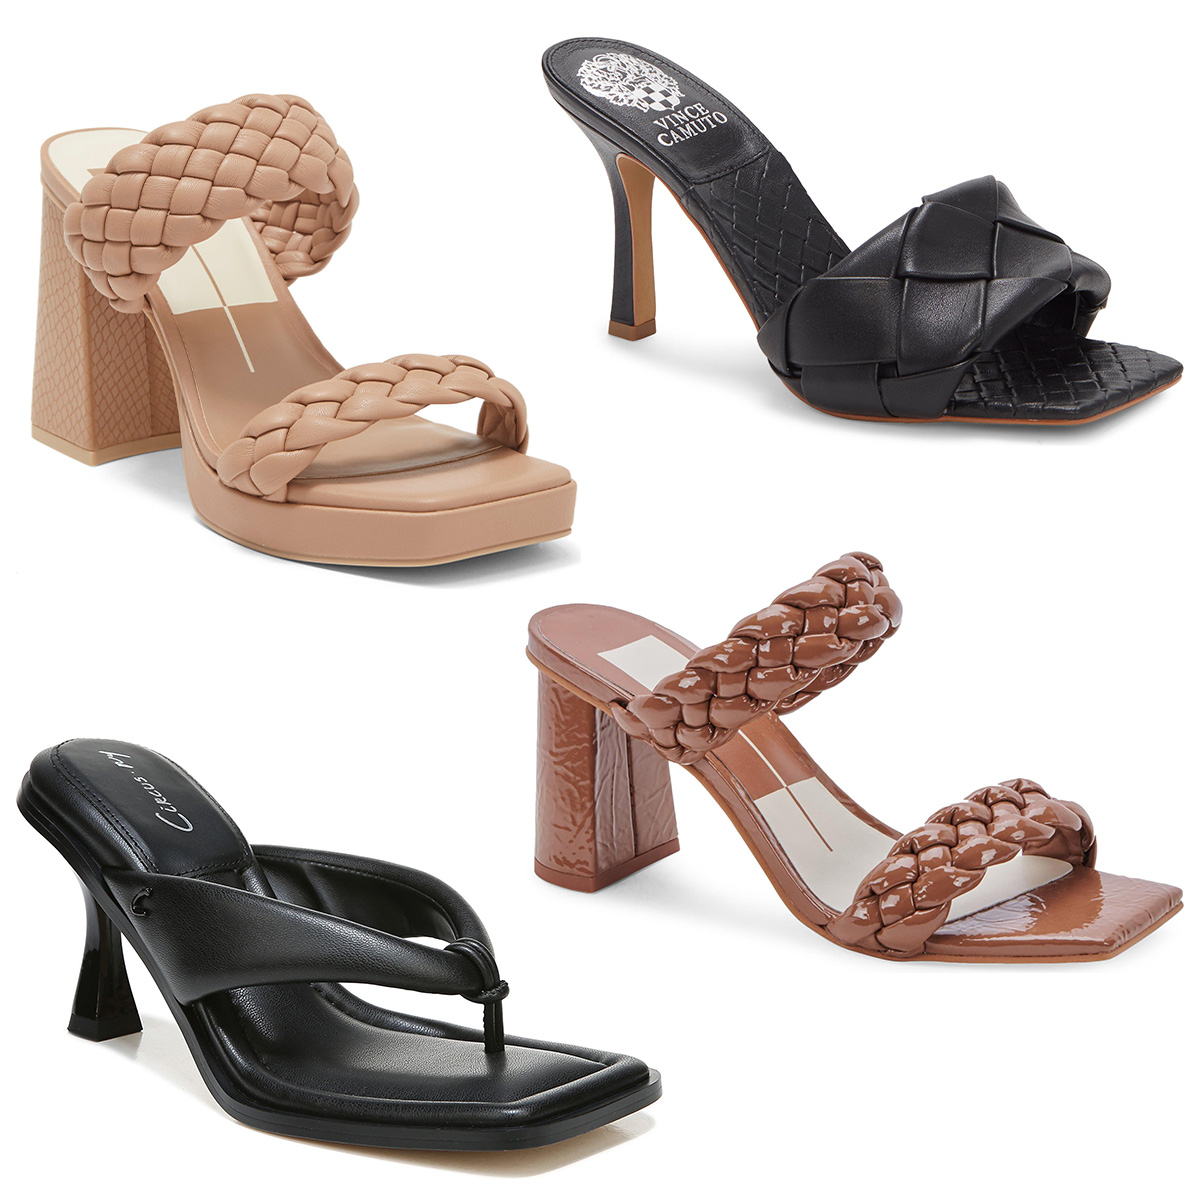 Nordstrom Rack Women's Shoes Sale Up to 80% Off